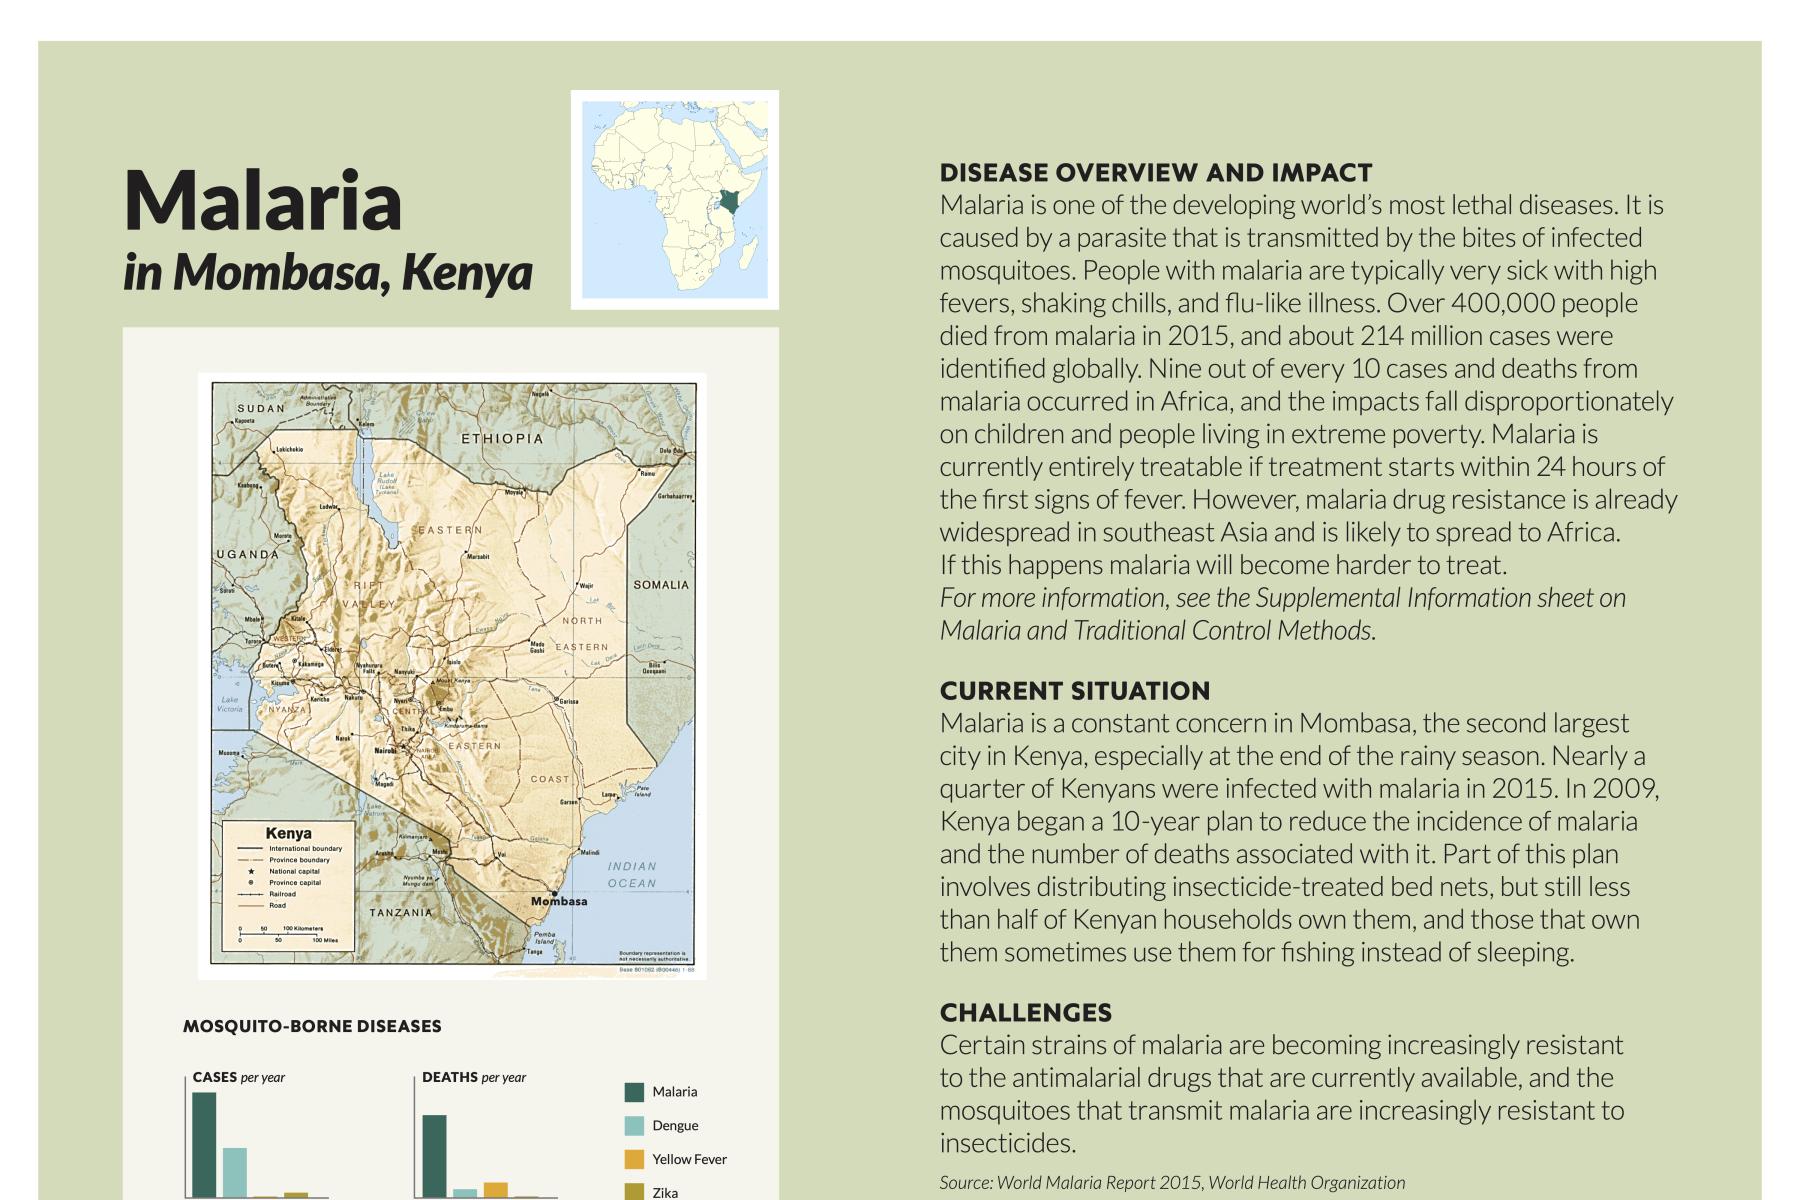 Should we engineer the mosquito discussion materials showing map of Kenya